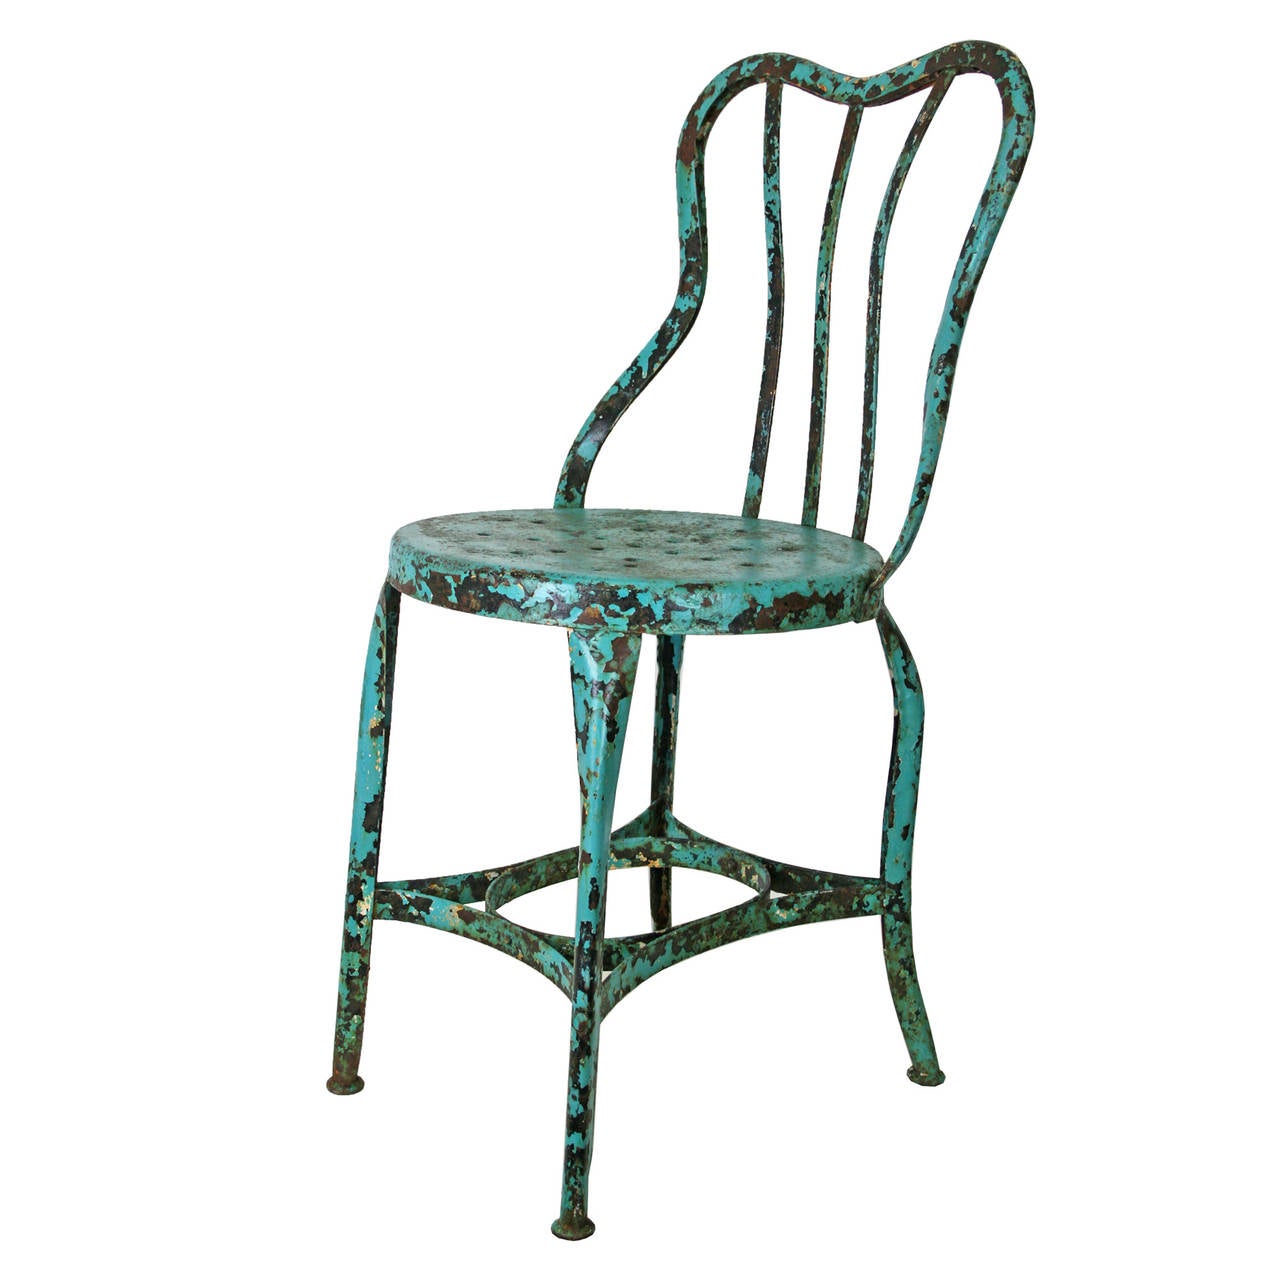 We are in love. This set of Toledo cafe chairs bring absolutely everything to the table: the historic importance of the Toledo-based Uhl Art Metal Furniture Company, an incredible bright turquoise blue finish, which is perfectly worn from a lifetime